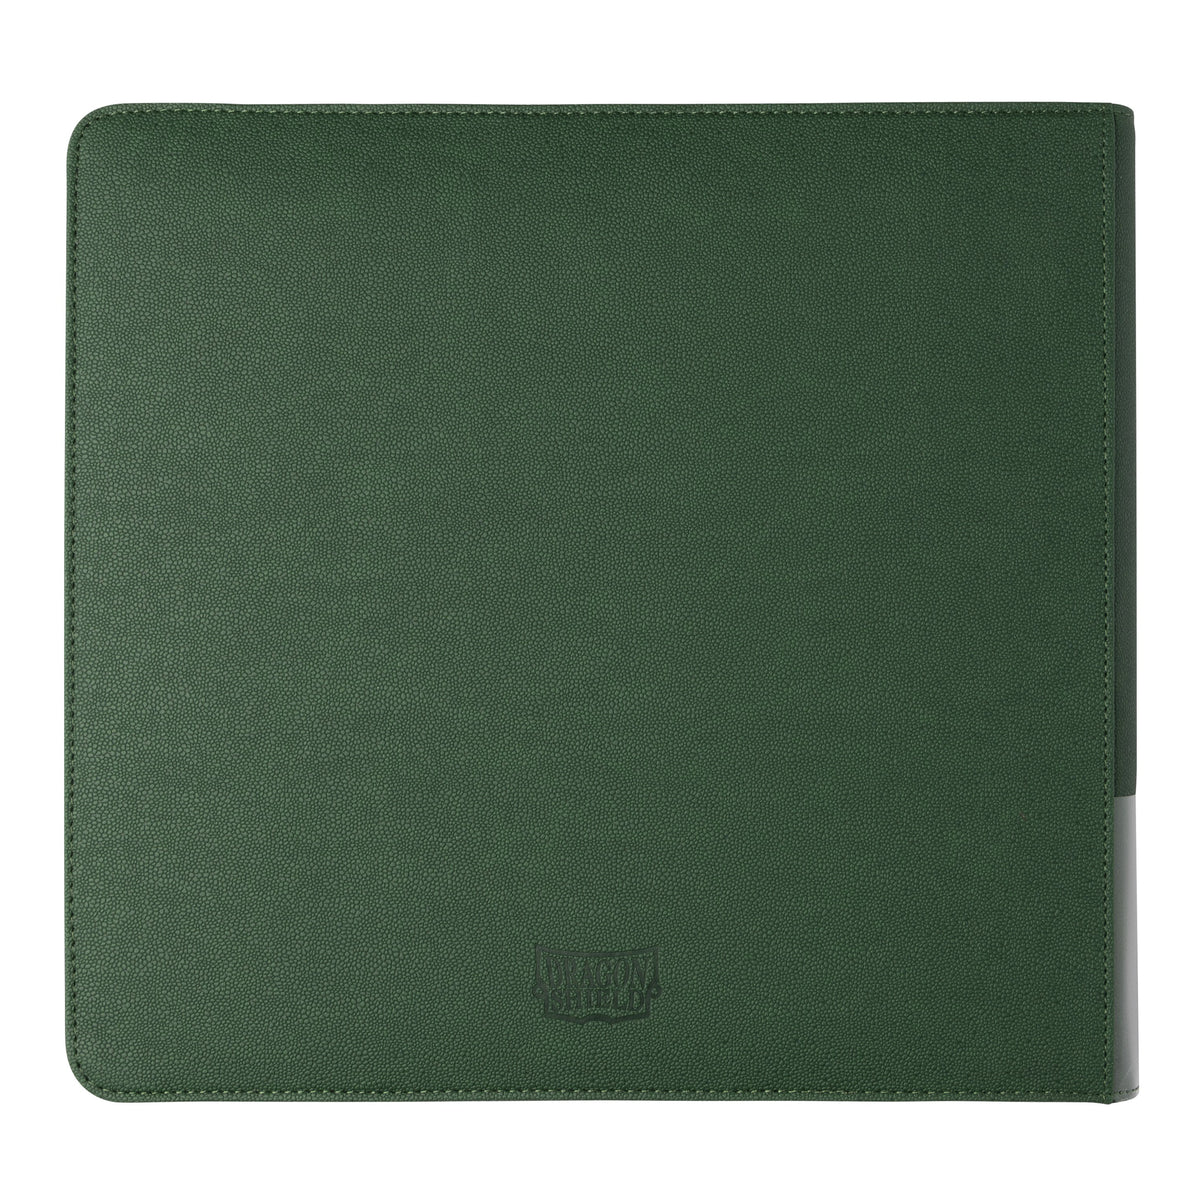 Dragon Shield - Zipster XL - Forest Green